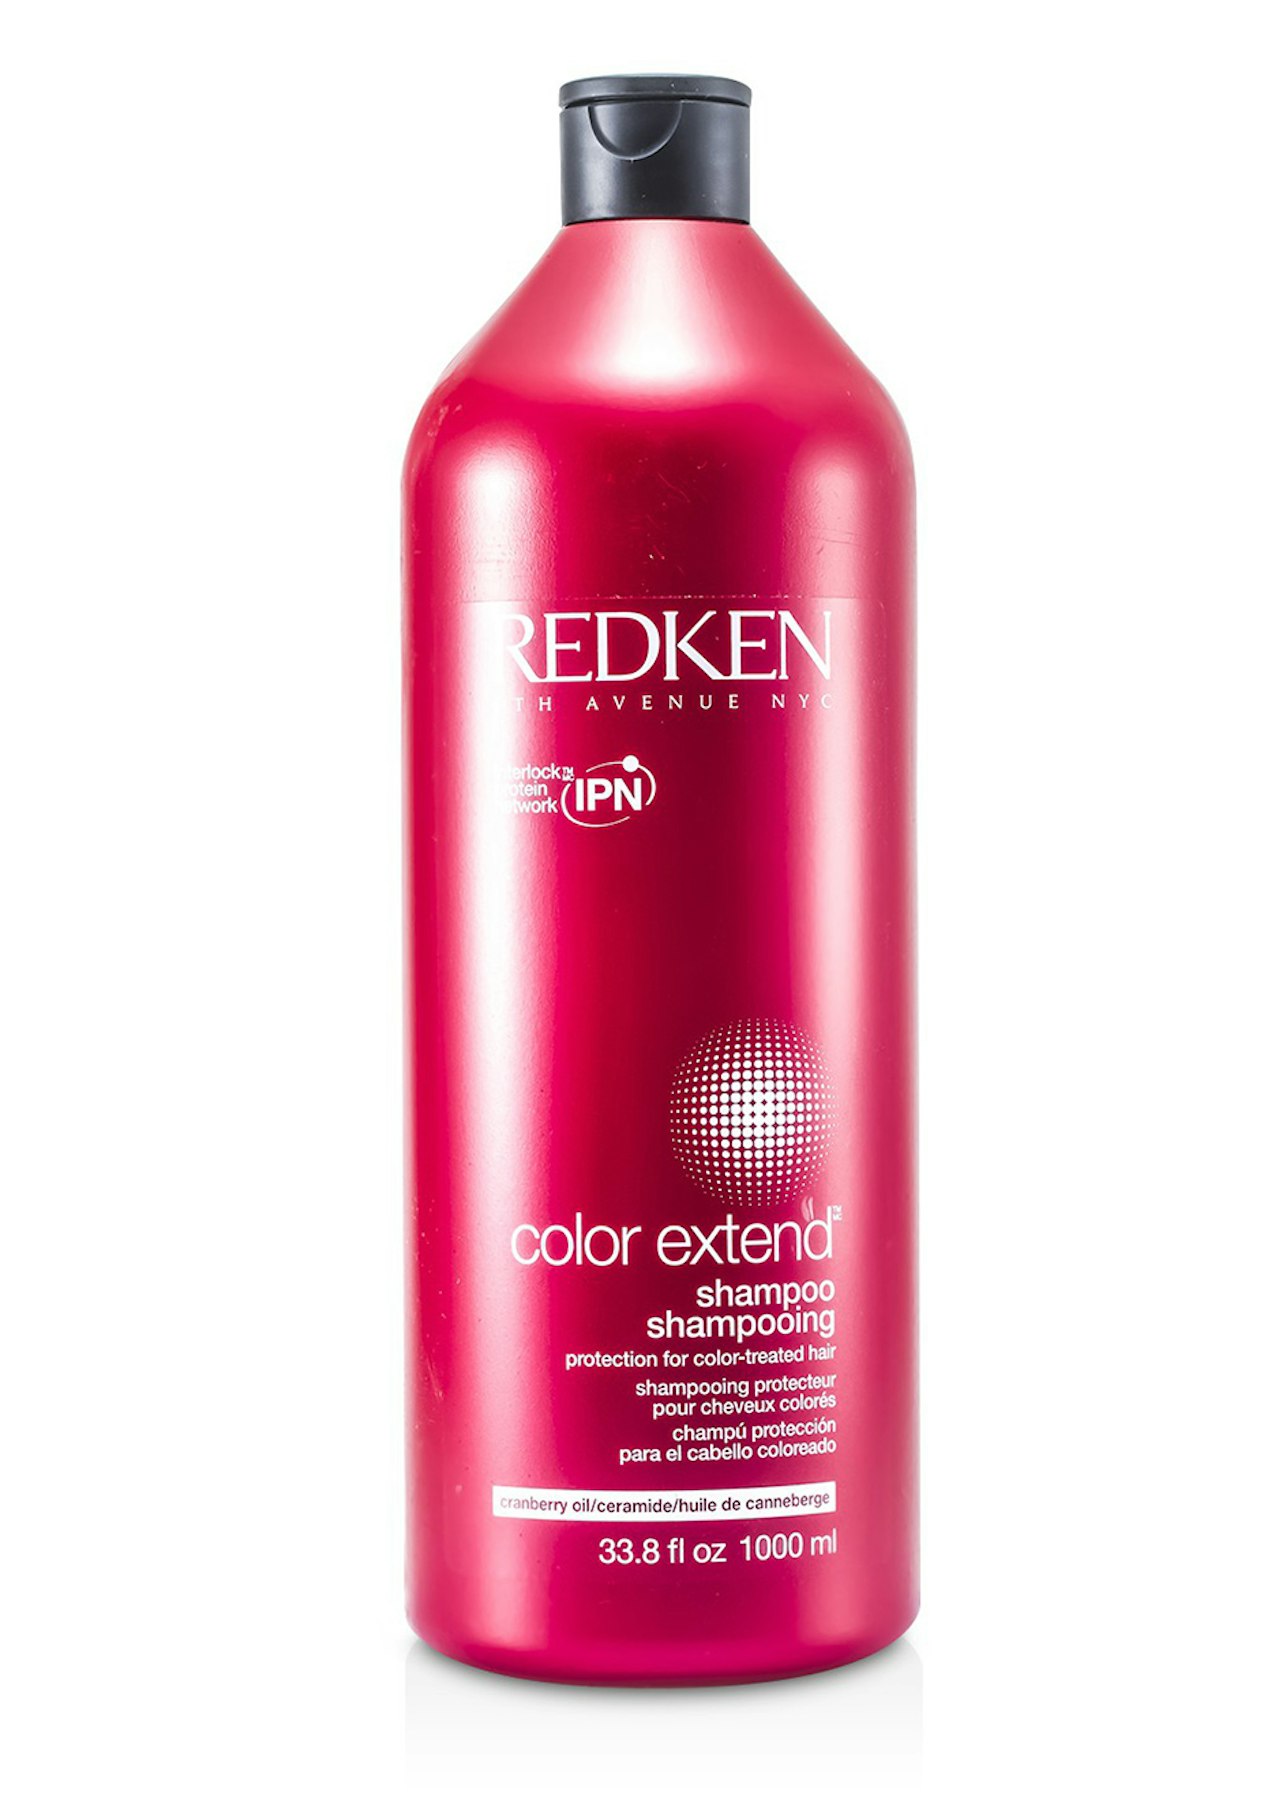 Redken Shampoo 1000Ml Color Extend For Colour Treated Hair